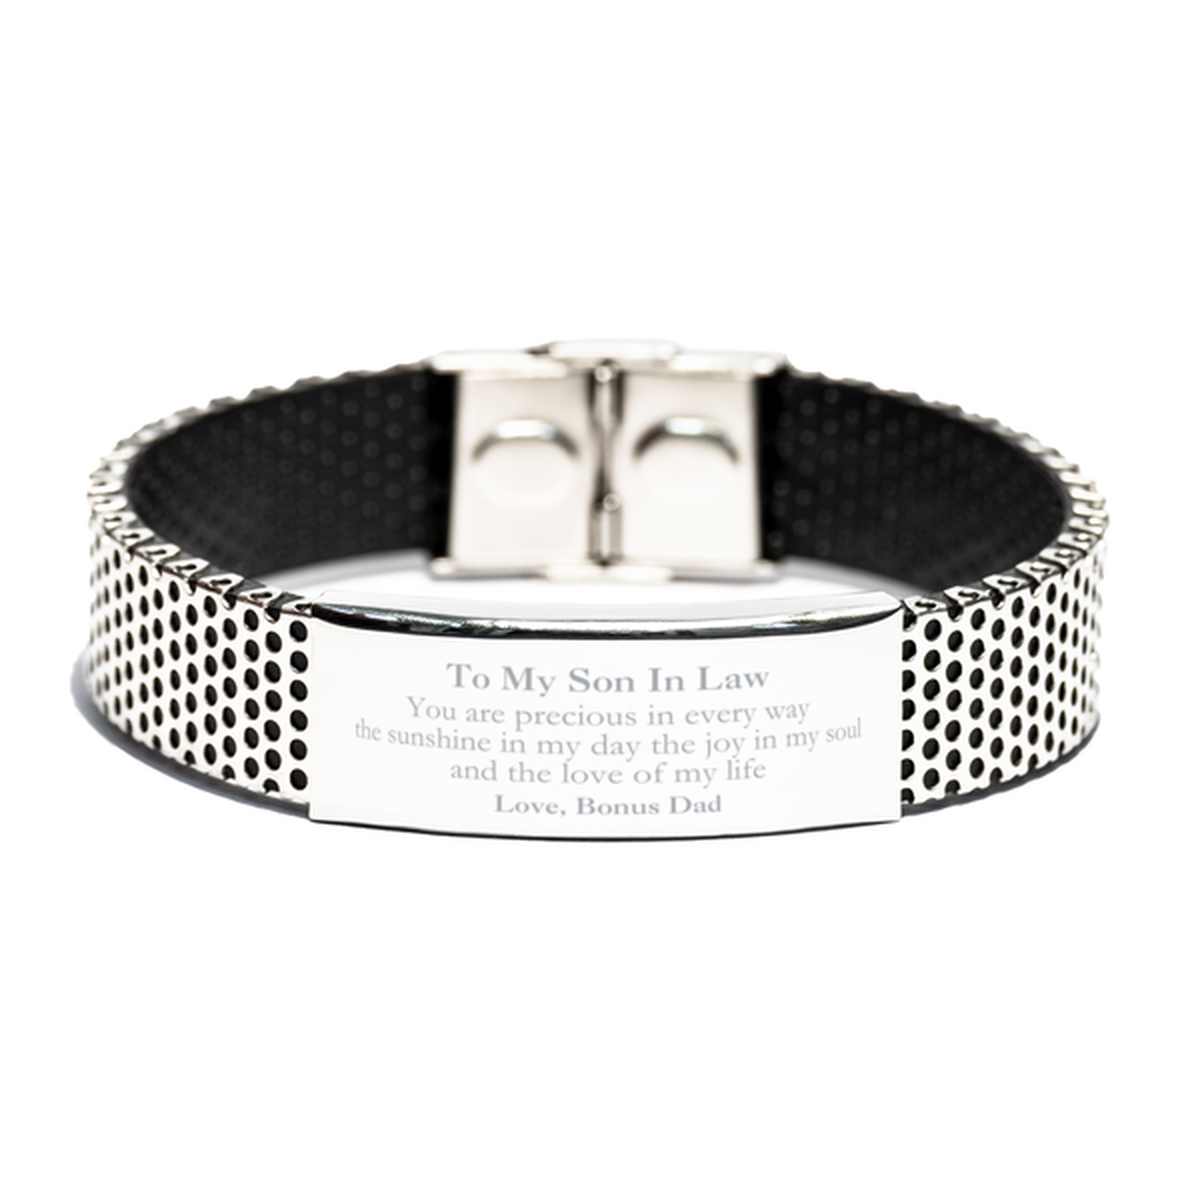 Graduation Gifts for Son In Law Stainless Steel Bracelet Present from Bonus Dad, Christmas Son In Law Birthday Gifts Son In Law You are precious in every way the sunshine in my day. Love, Bonus Dad